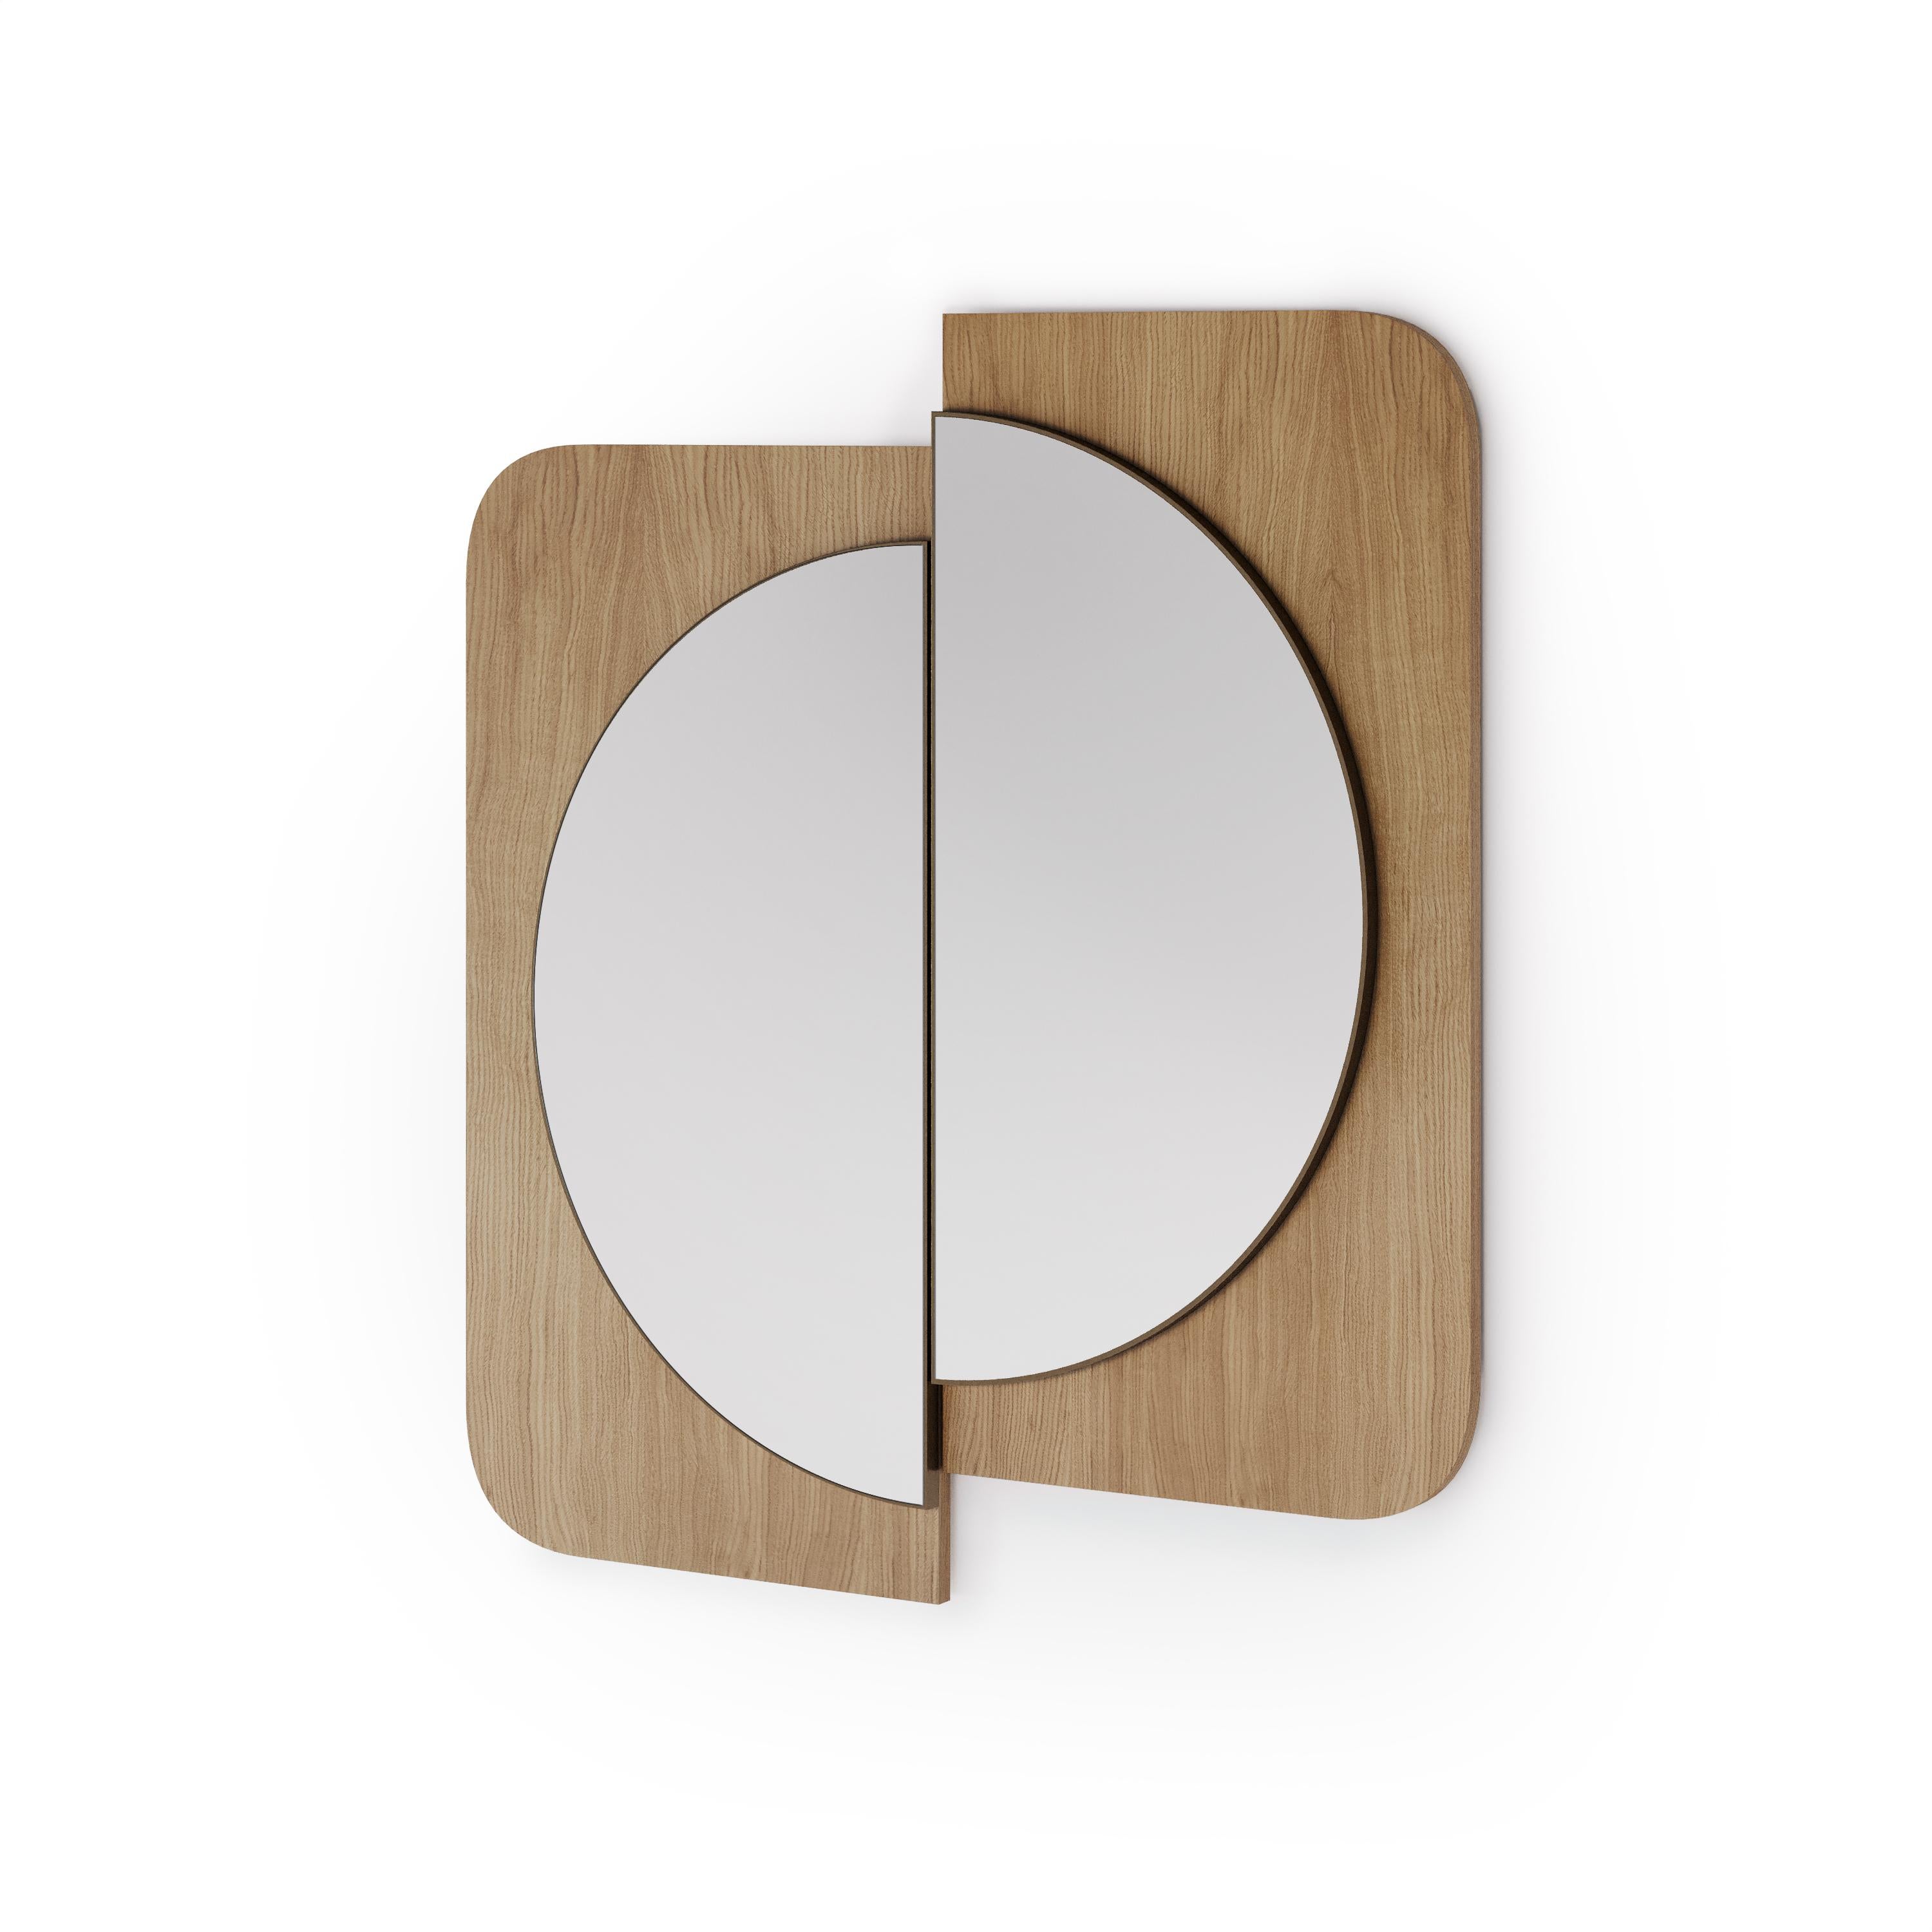 This contemporary mirror is created with simplicity and longevity in mind.